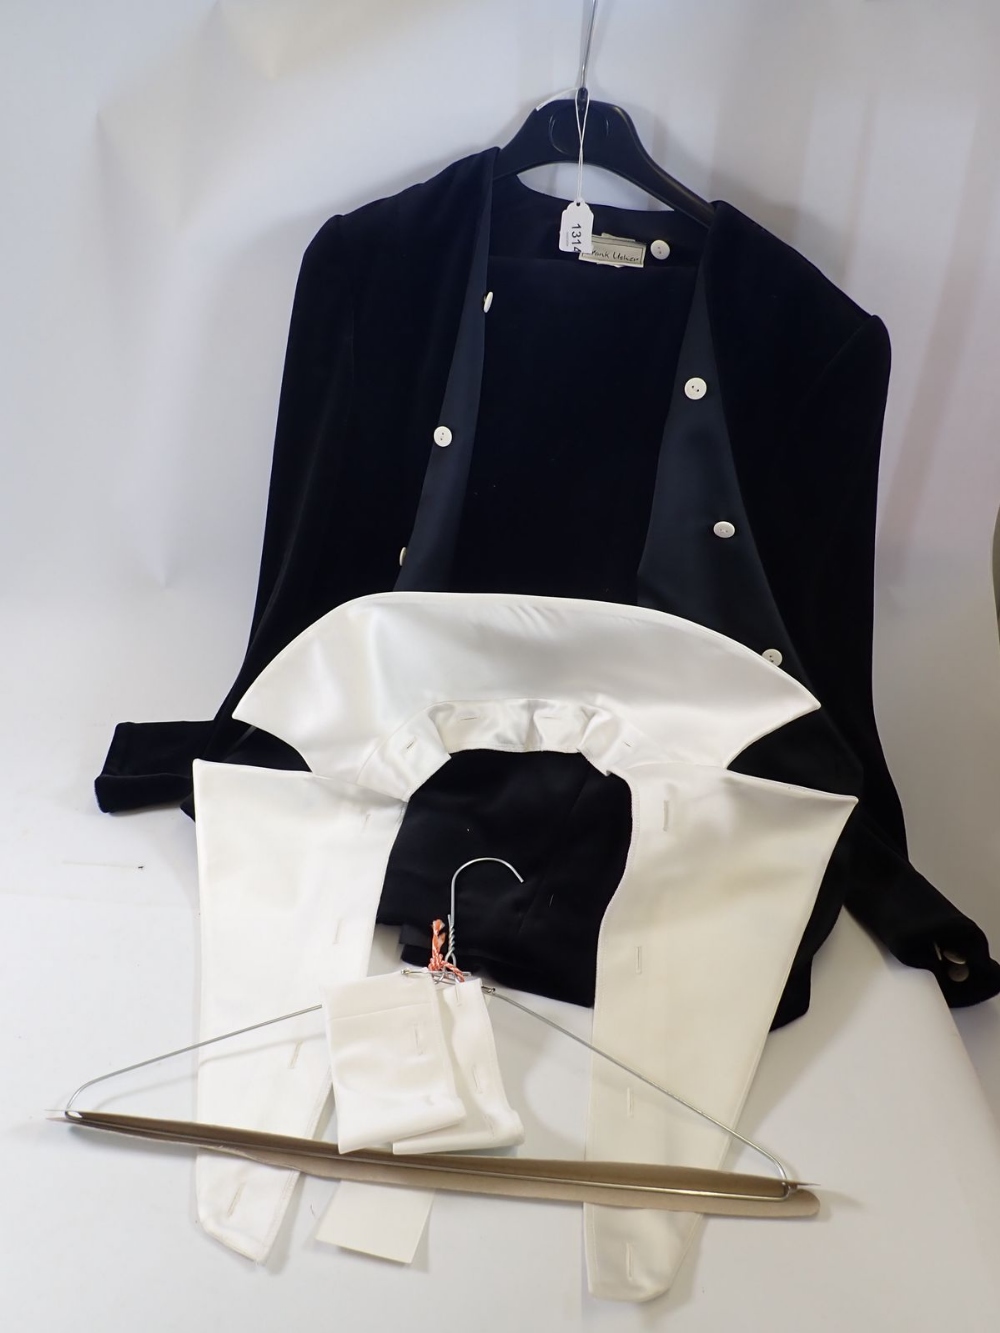 A Frank Usher ladies jacket and skirt in black with detachable white collar and cuffs, size UK 12 - Image 2 of 2